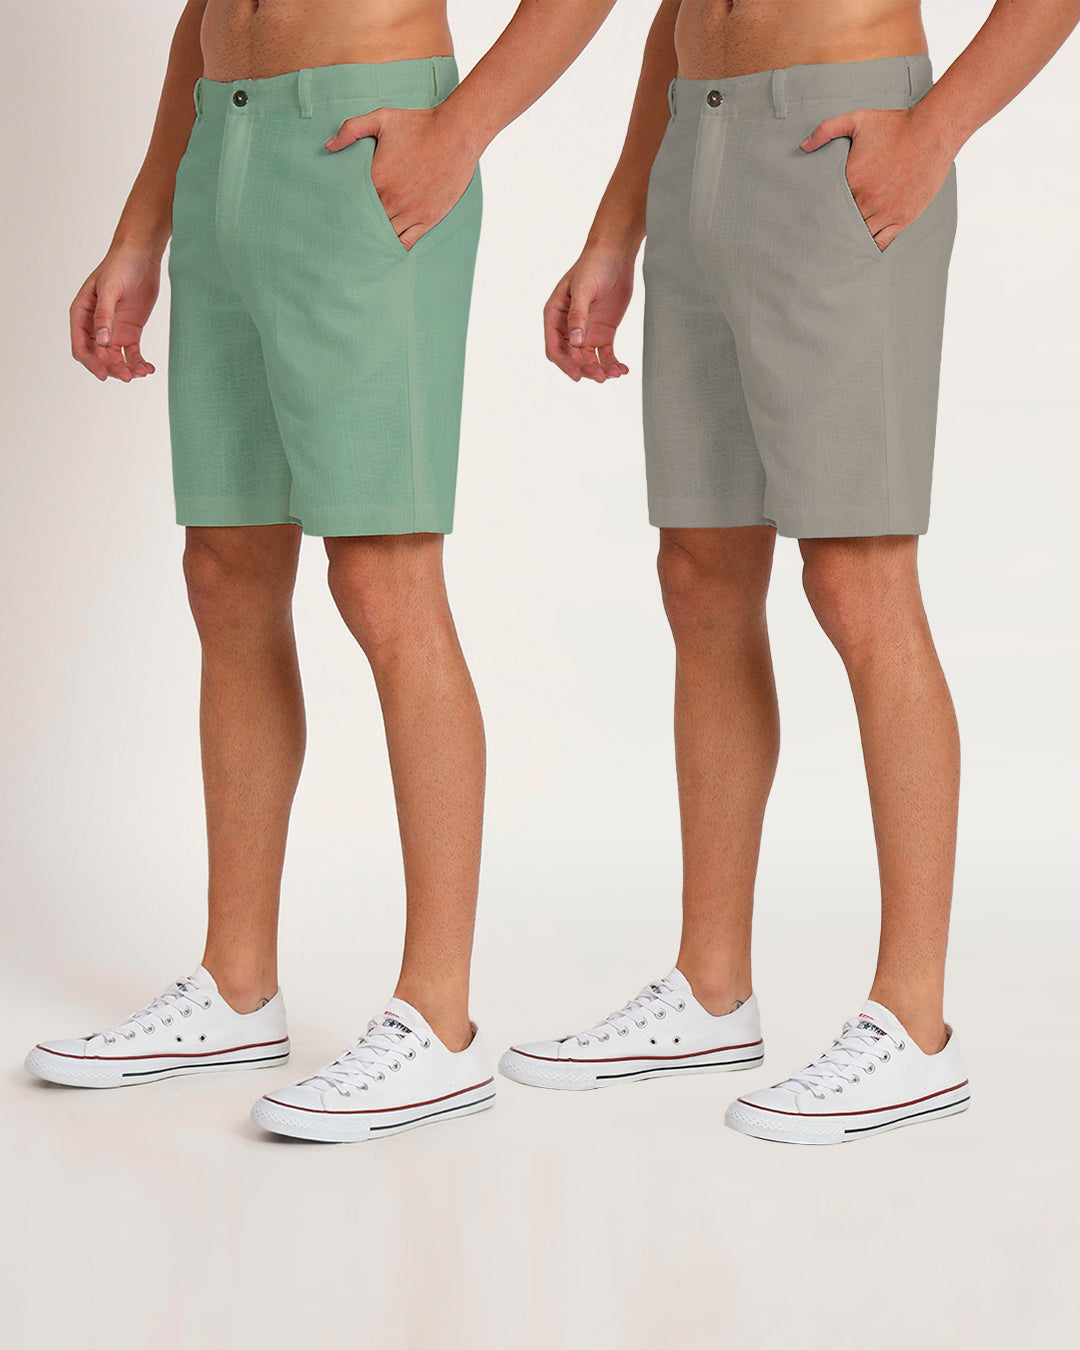 Combo : Ready For Anything Grey & Spring Green Men's Shorts